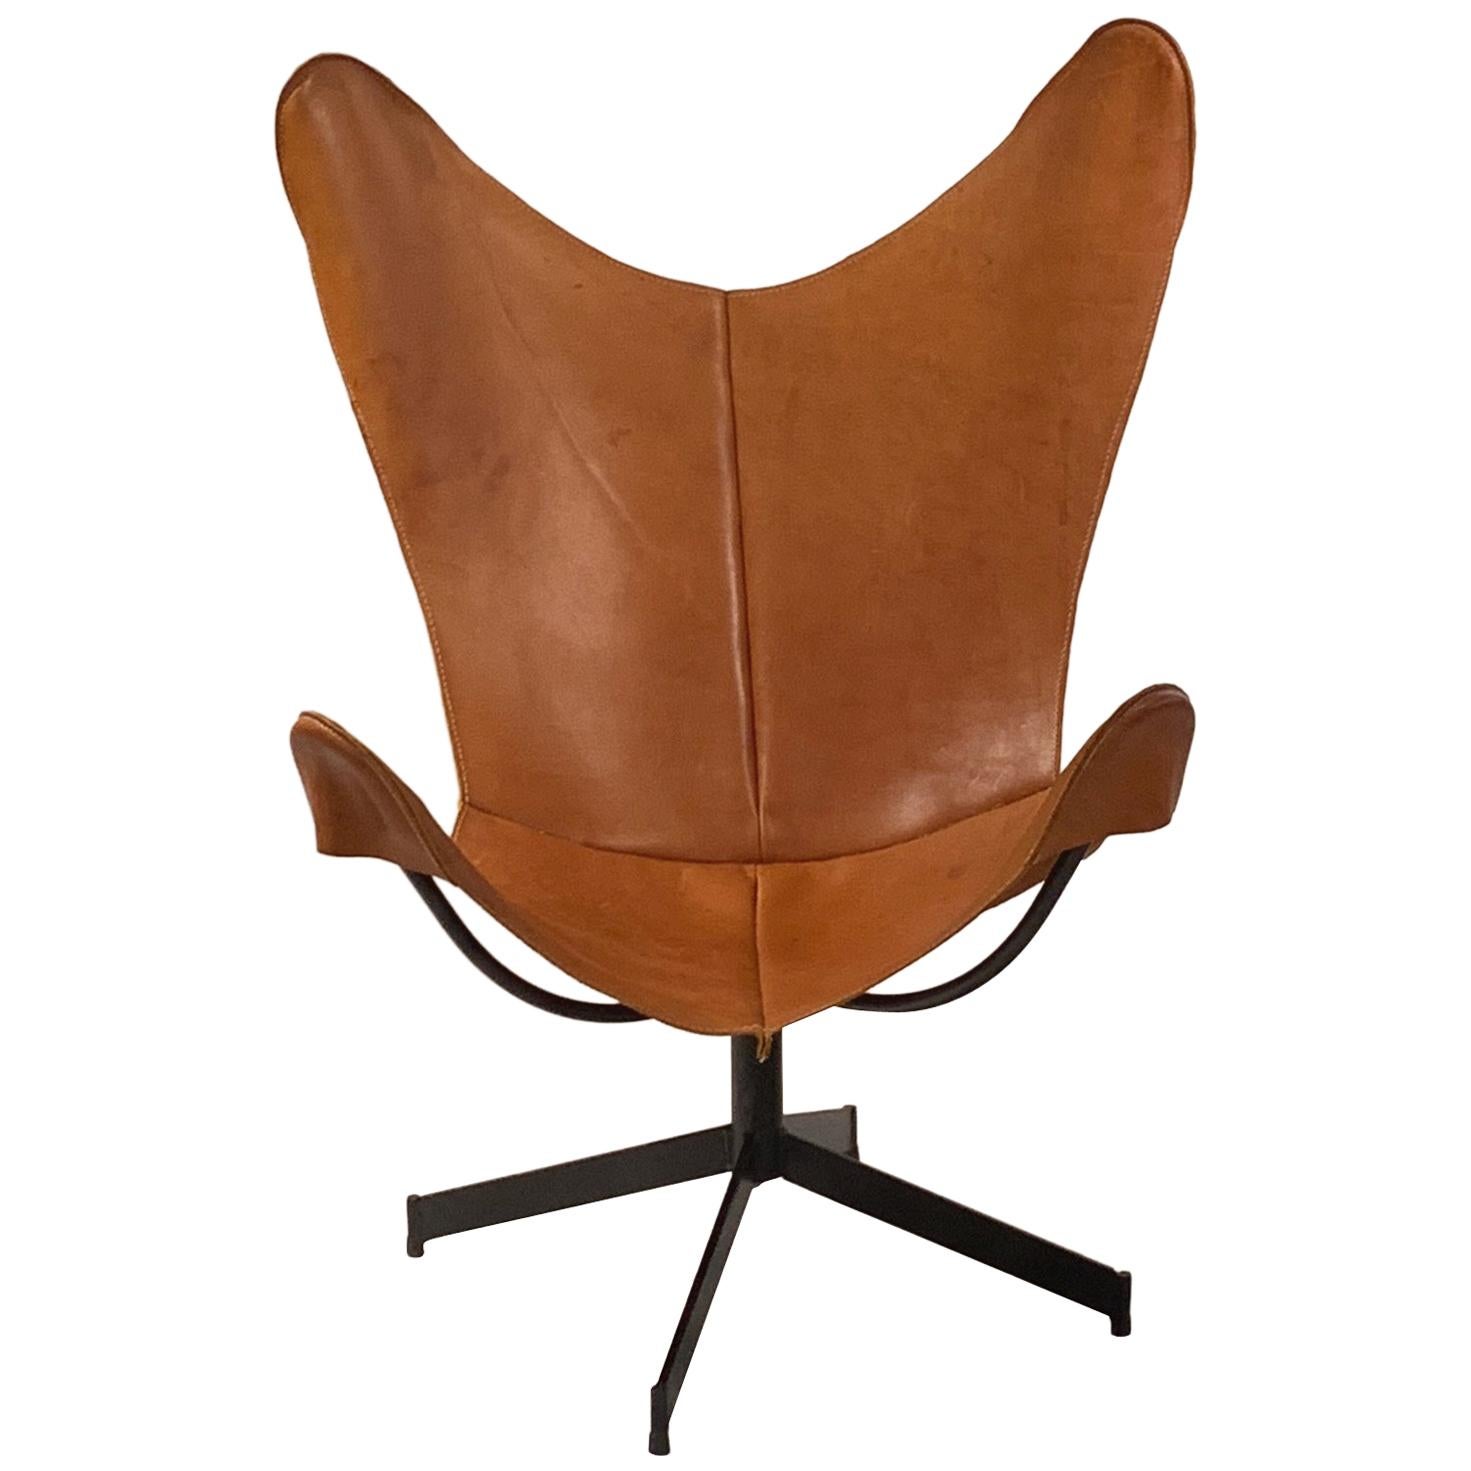 Rare 1960s William Katavolous Sculptural Leather Swivel Sling Butterfly Chair